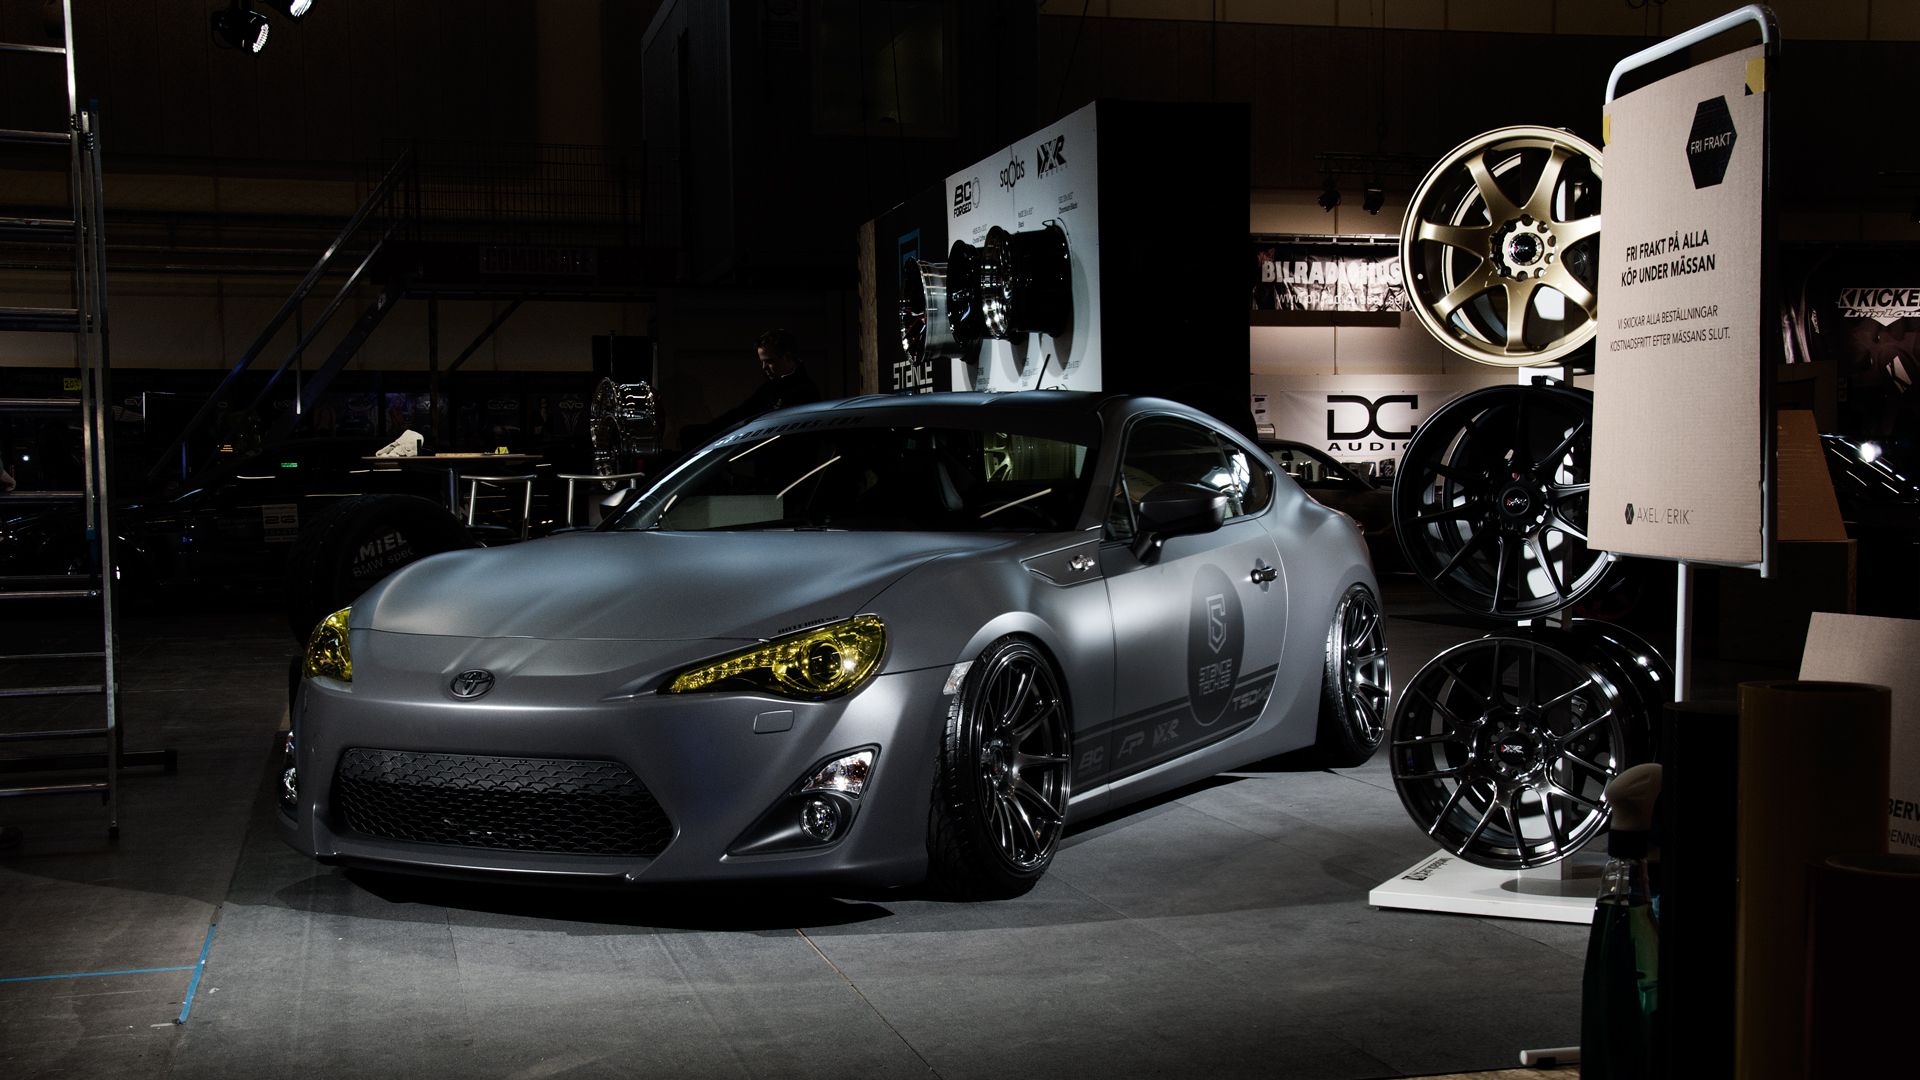 Free Download Toyota Gt86 Wallpaper Image 58 19x1080 For Your Desktop Mobile Tablet Explore 95 Toyota Gt86 Wallpapers Toyota Gt86 Wallpapers Toyota Wallpapers Toyota Tacoma Wallpaper